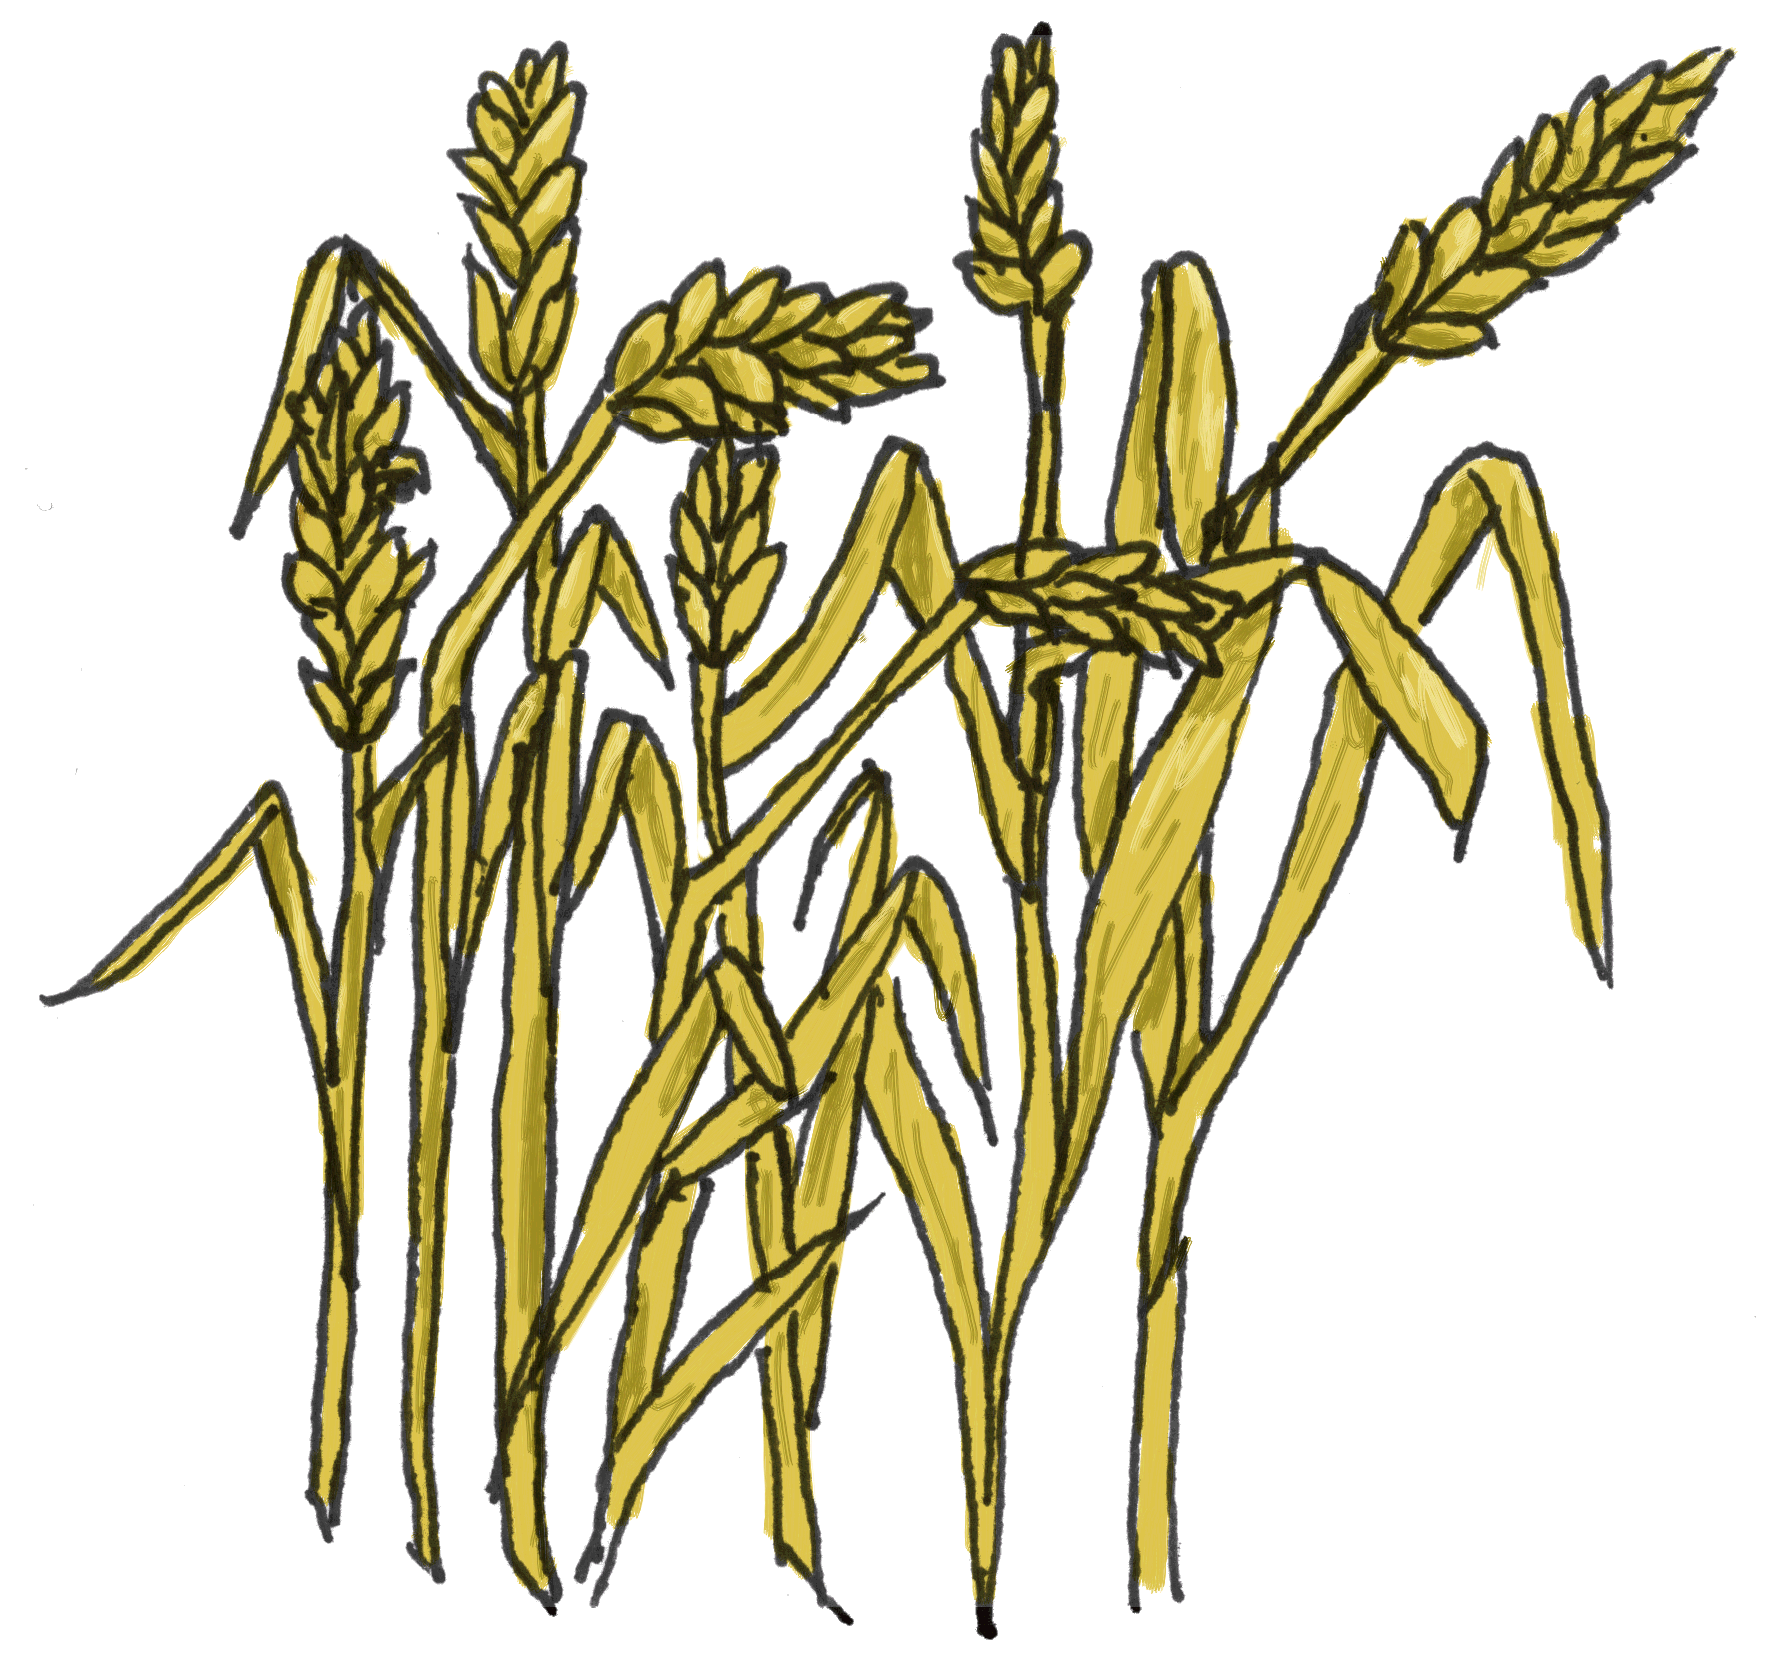 free clipart images wheat - photo #2